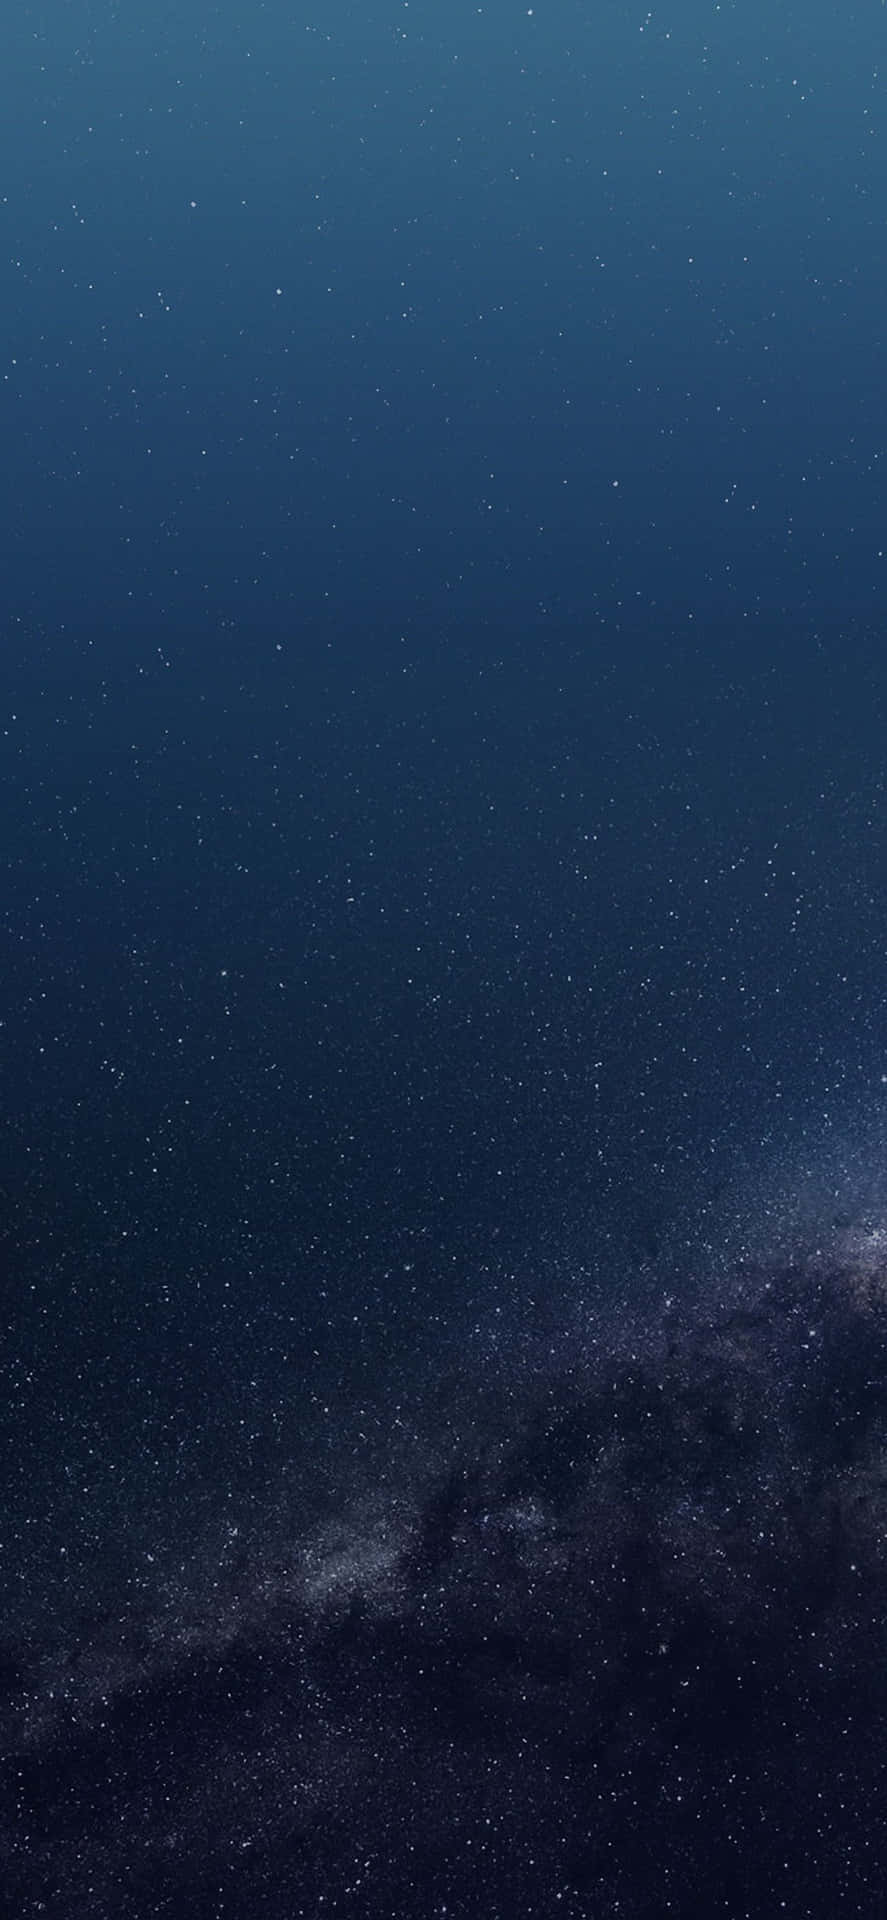 Download A Spaceship Is Flying Over The Ocean | Wallpapers.com